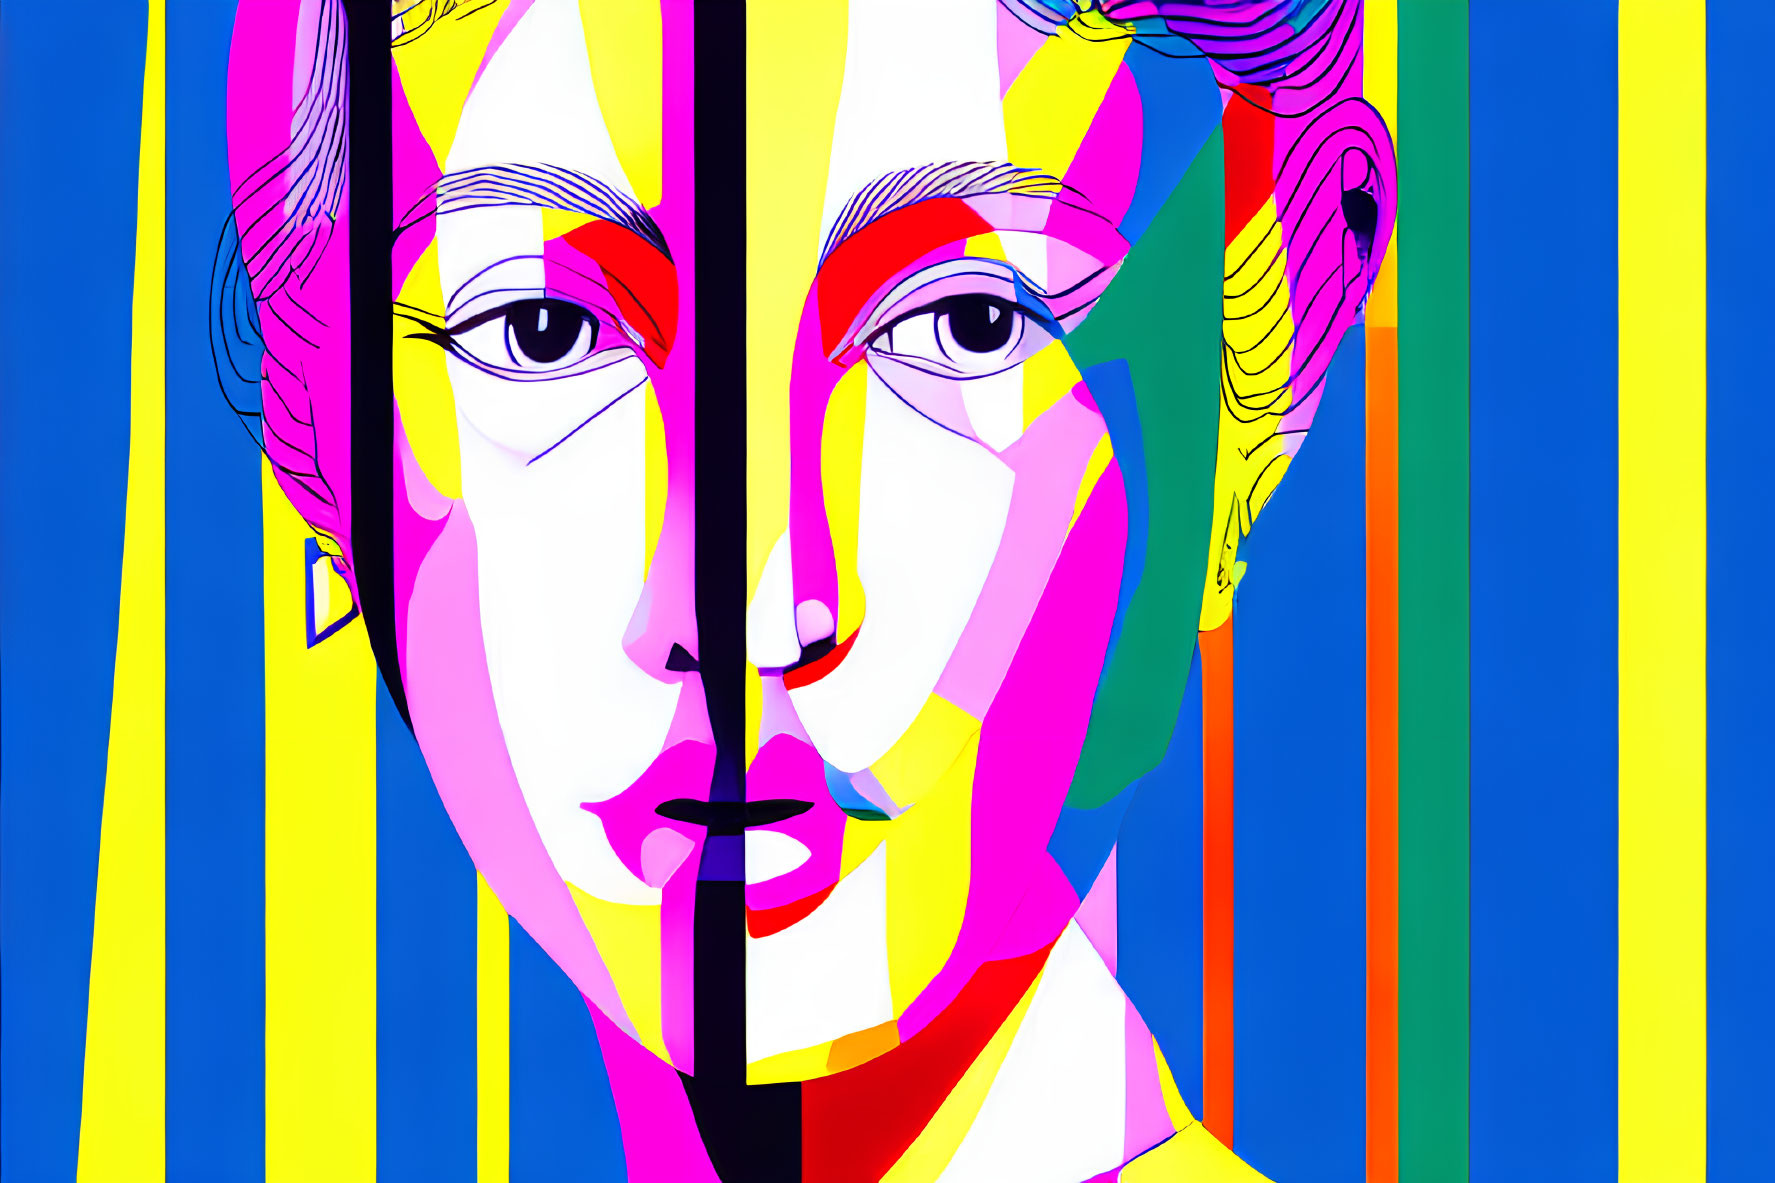 Vibrant Pop Art Female Face with Colorful Segments